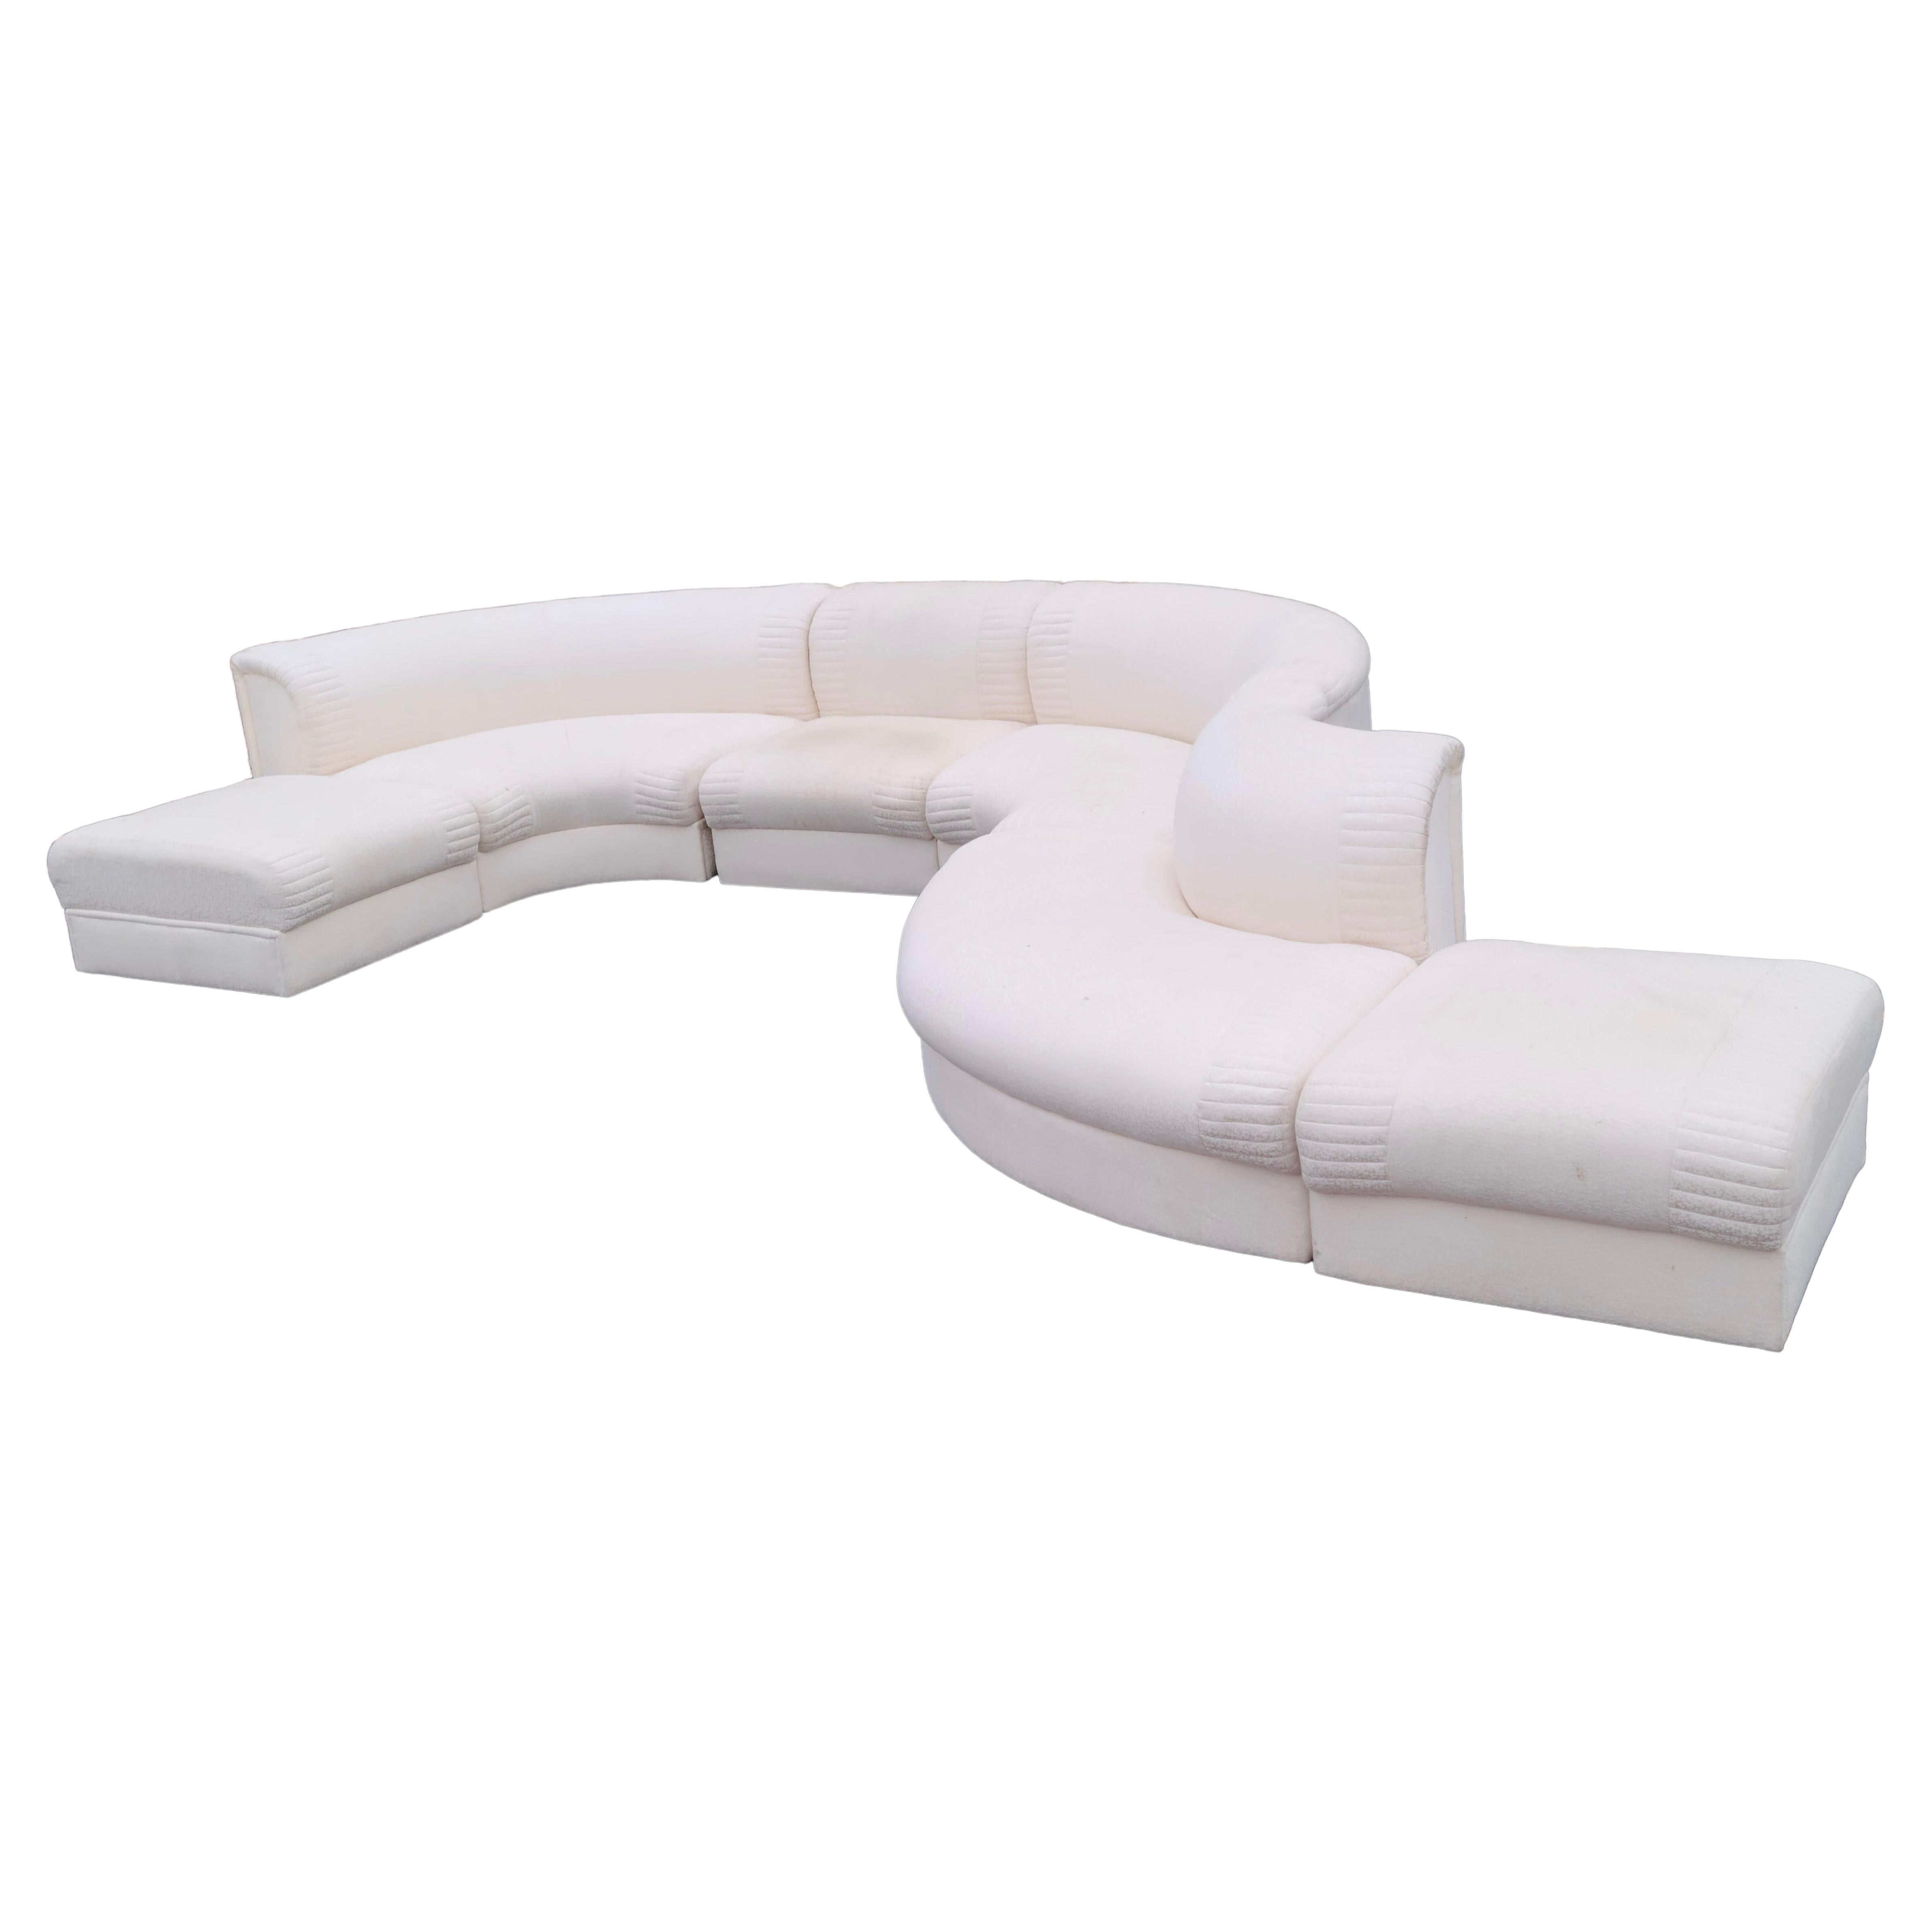 Serpentine sectional sofa by Weiman style of Kagan